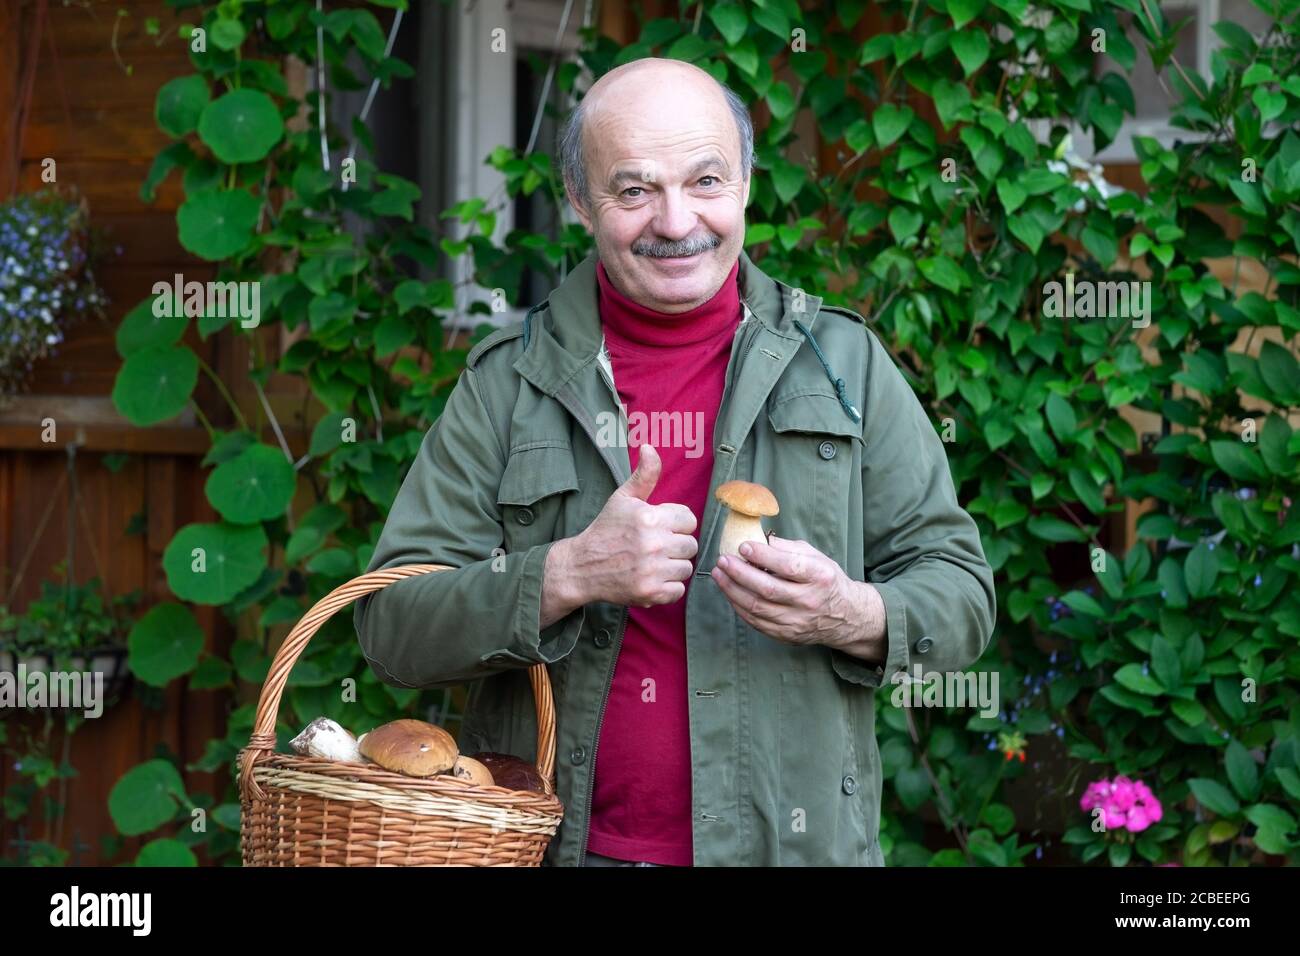 Old man gathers mushrooms showing a cep from basket. Stock Photo